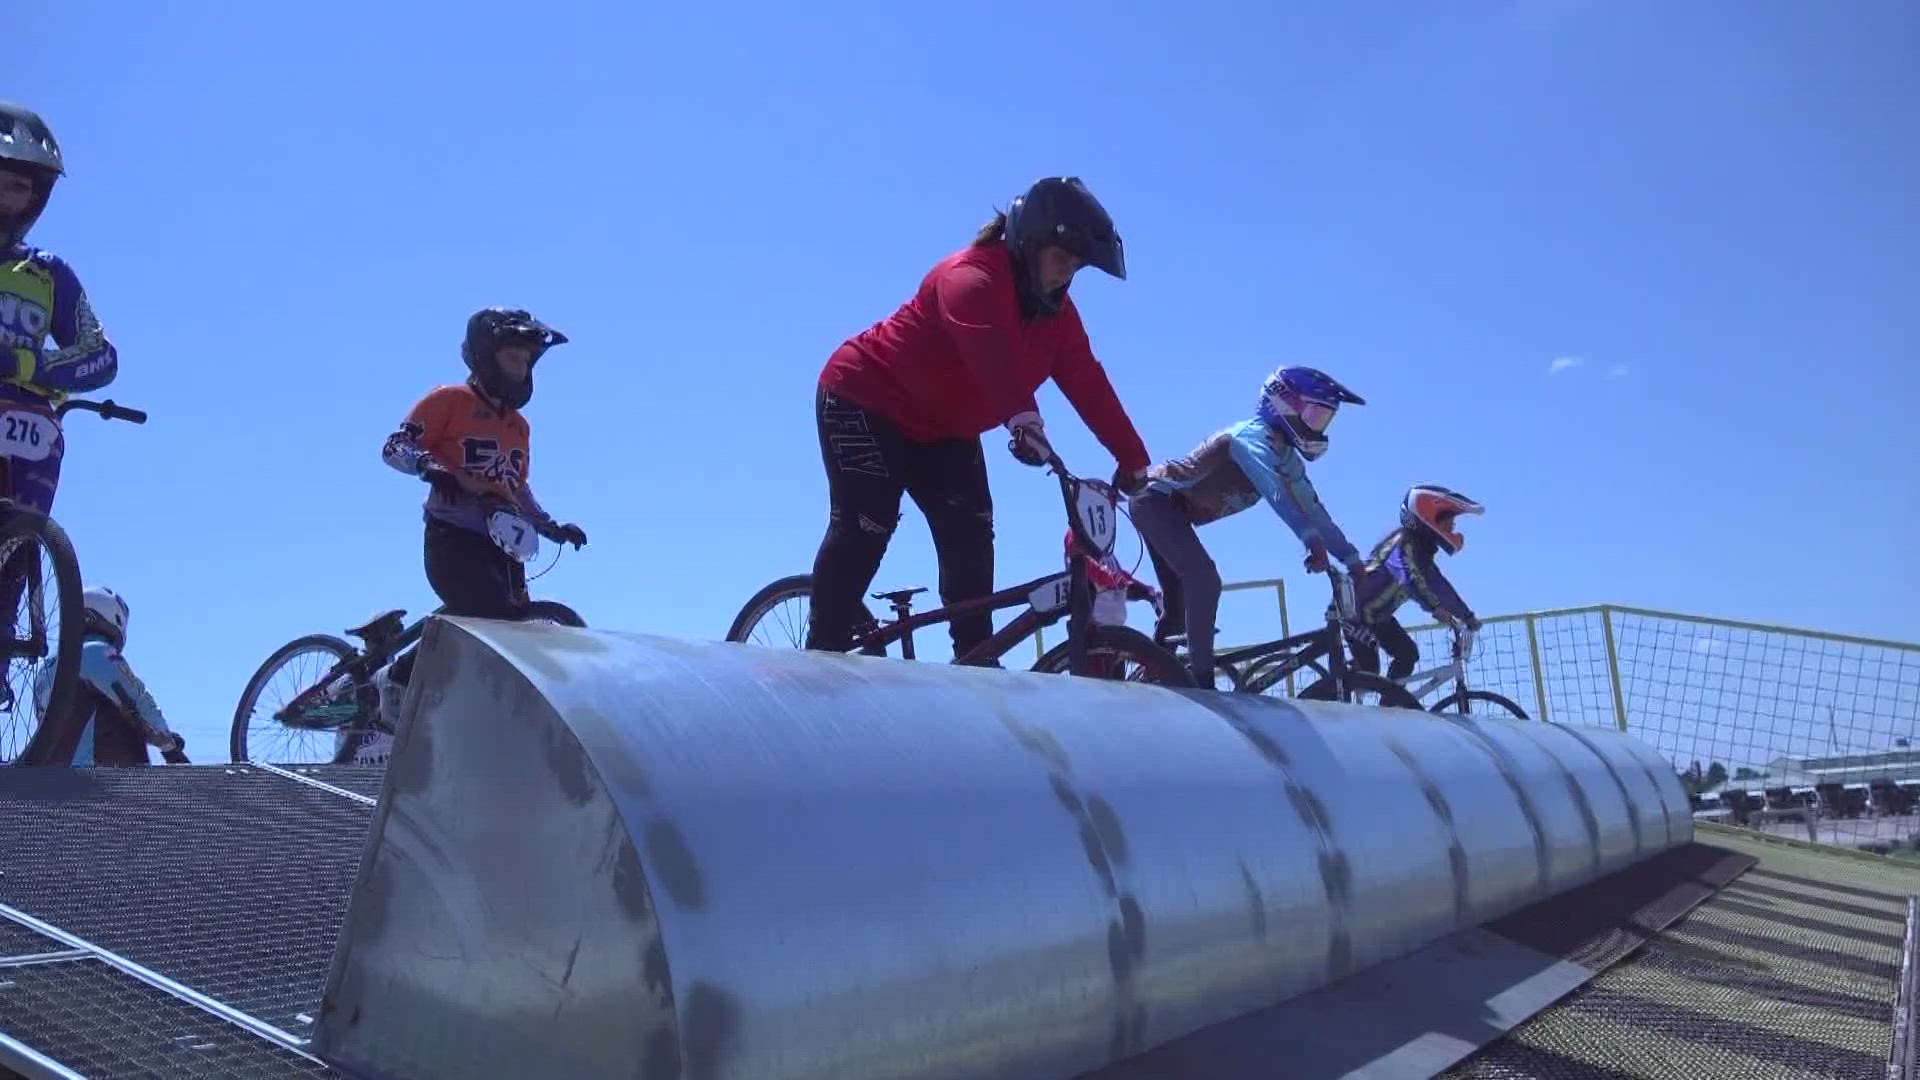 West Texas BMX hosted its State Race Weekend at Reyes-Mashburn-Nelms park in Midland. The organization hosted riders from around the state for the event